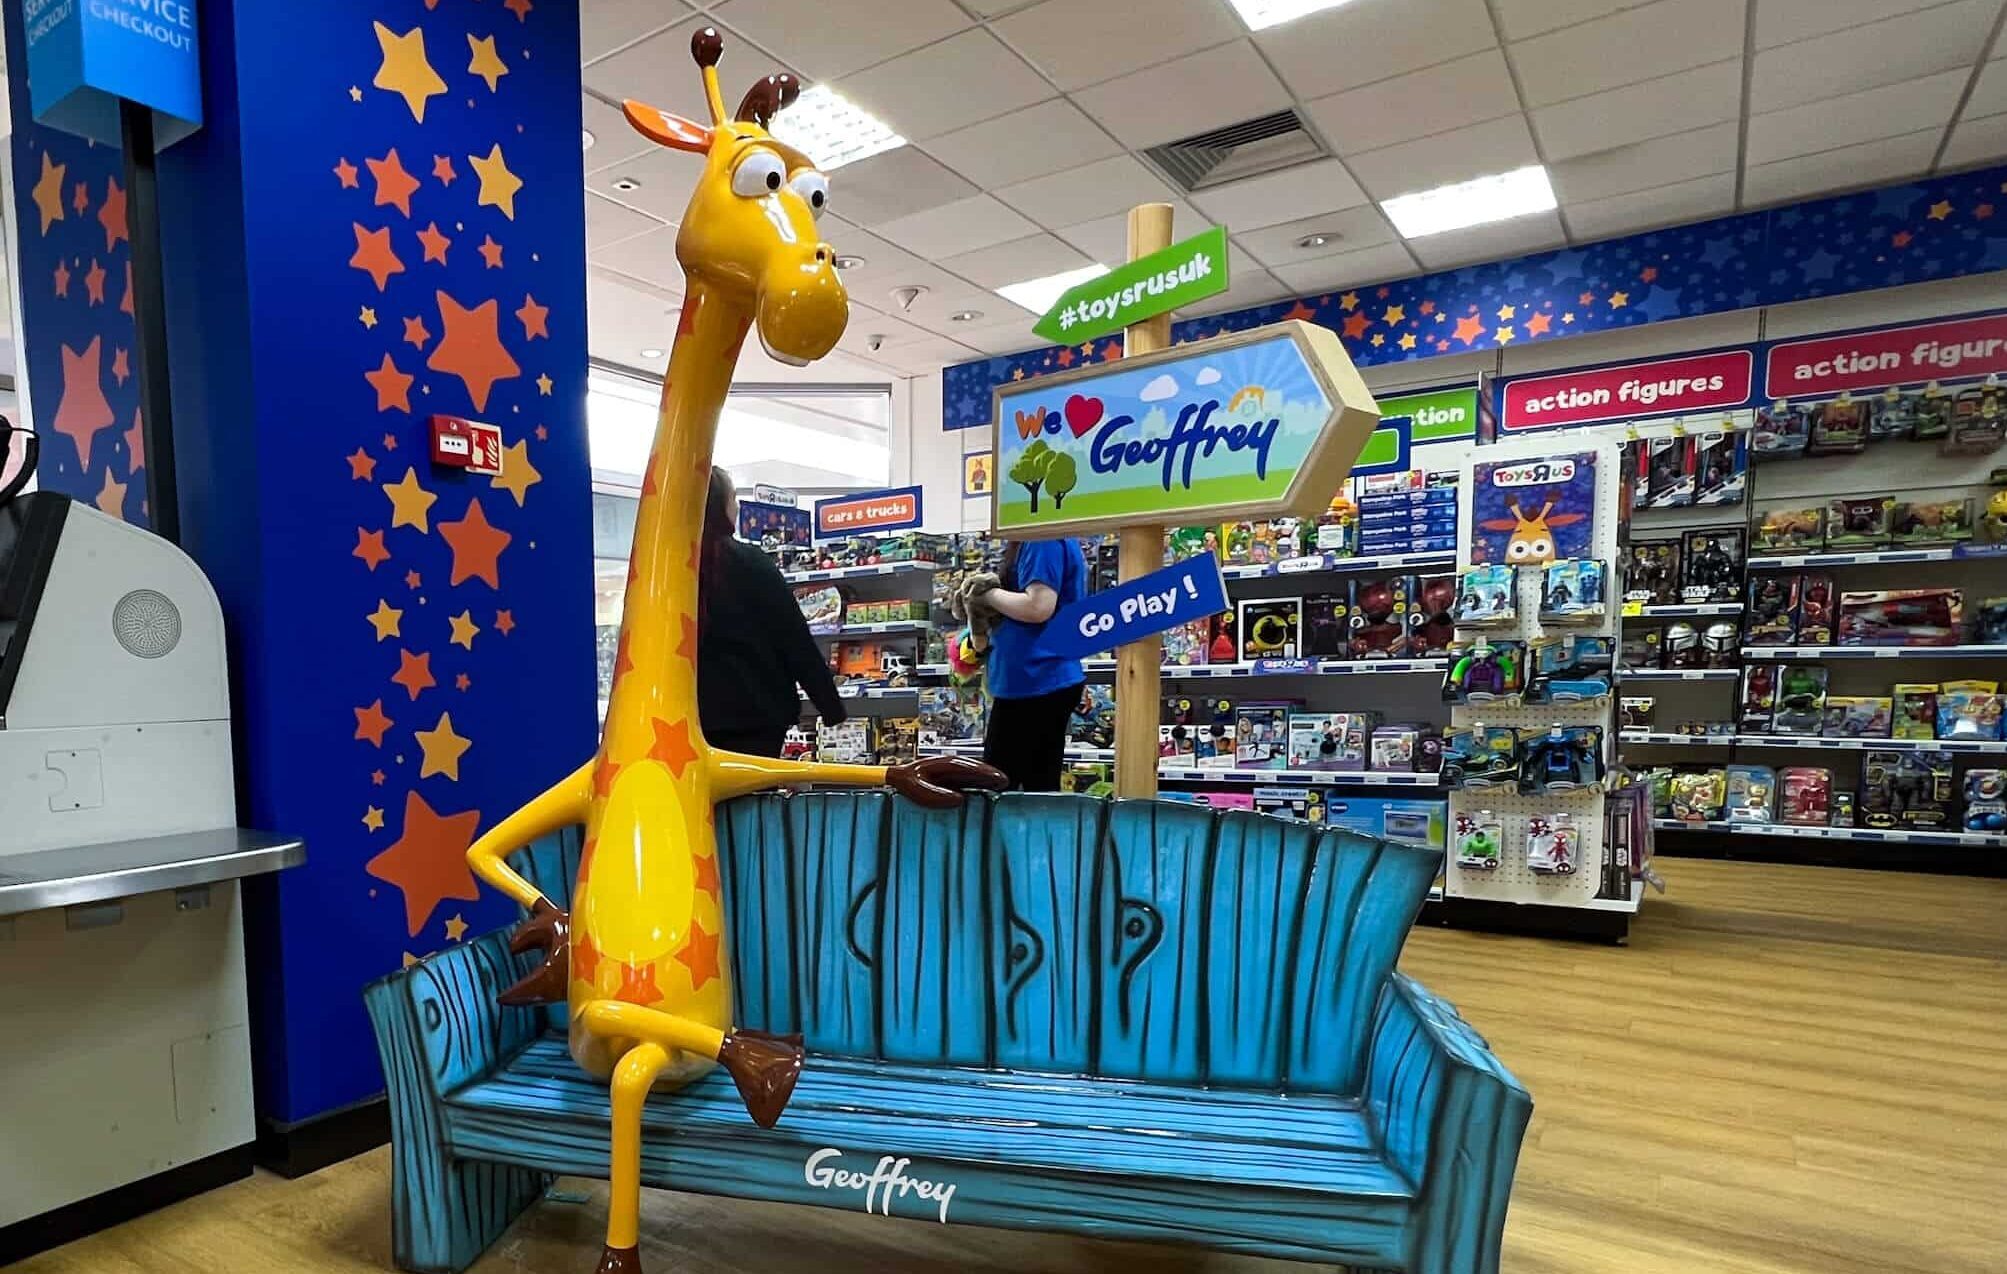 Geoffrey the Giraffe, the Toys R Us character